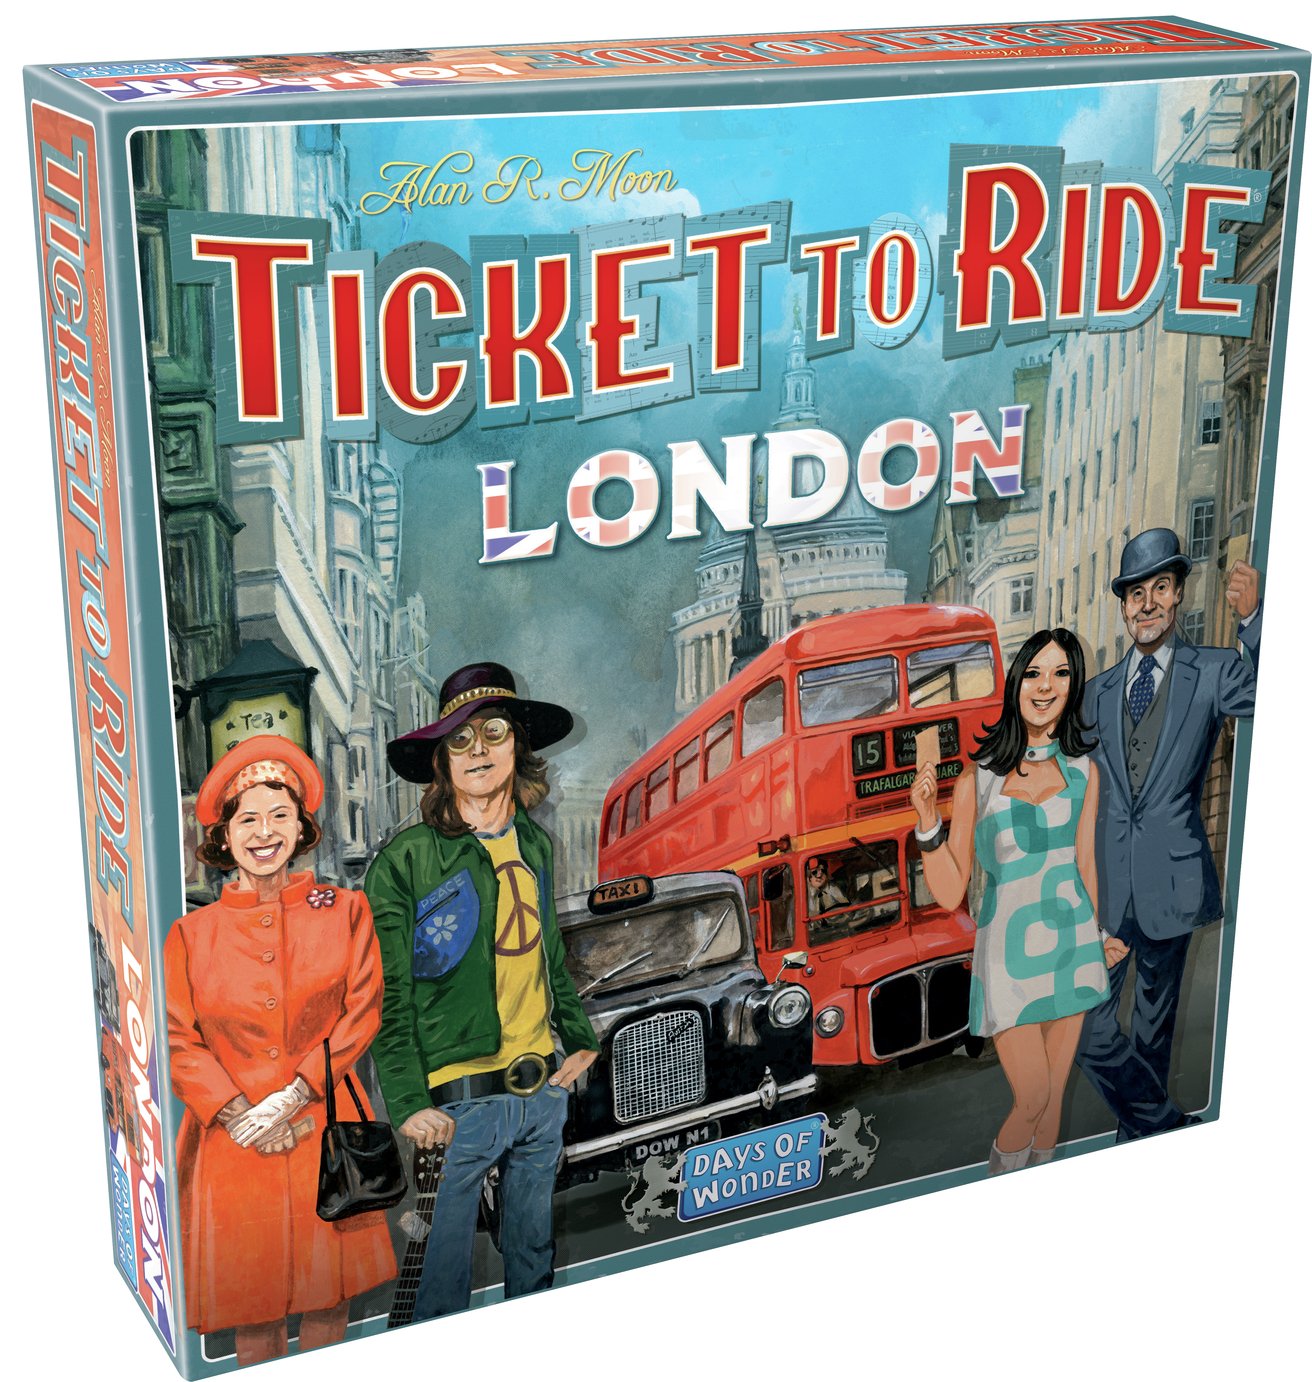 Ticket to Ride London Game review